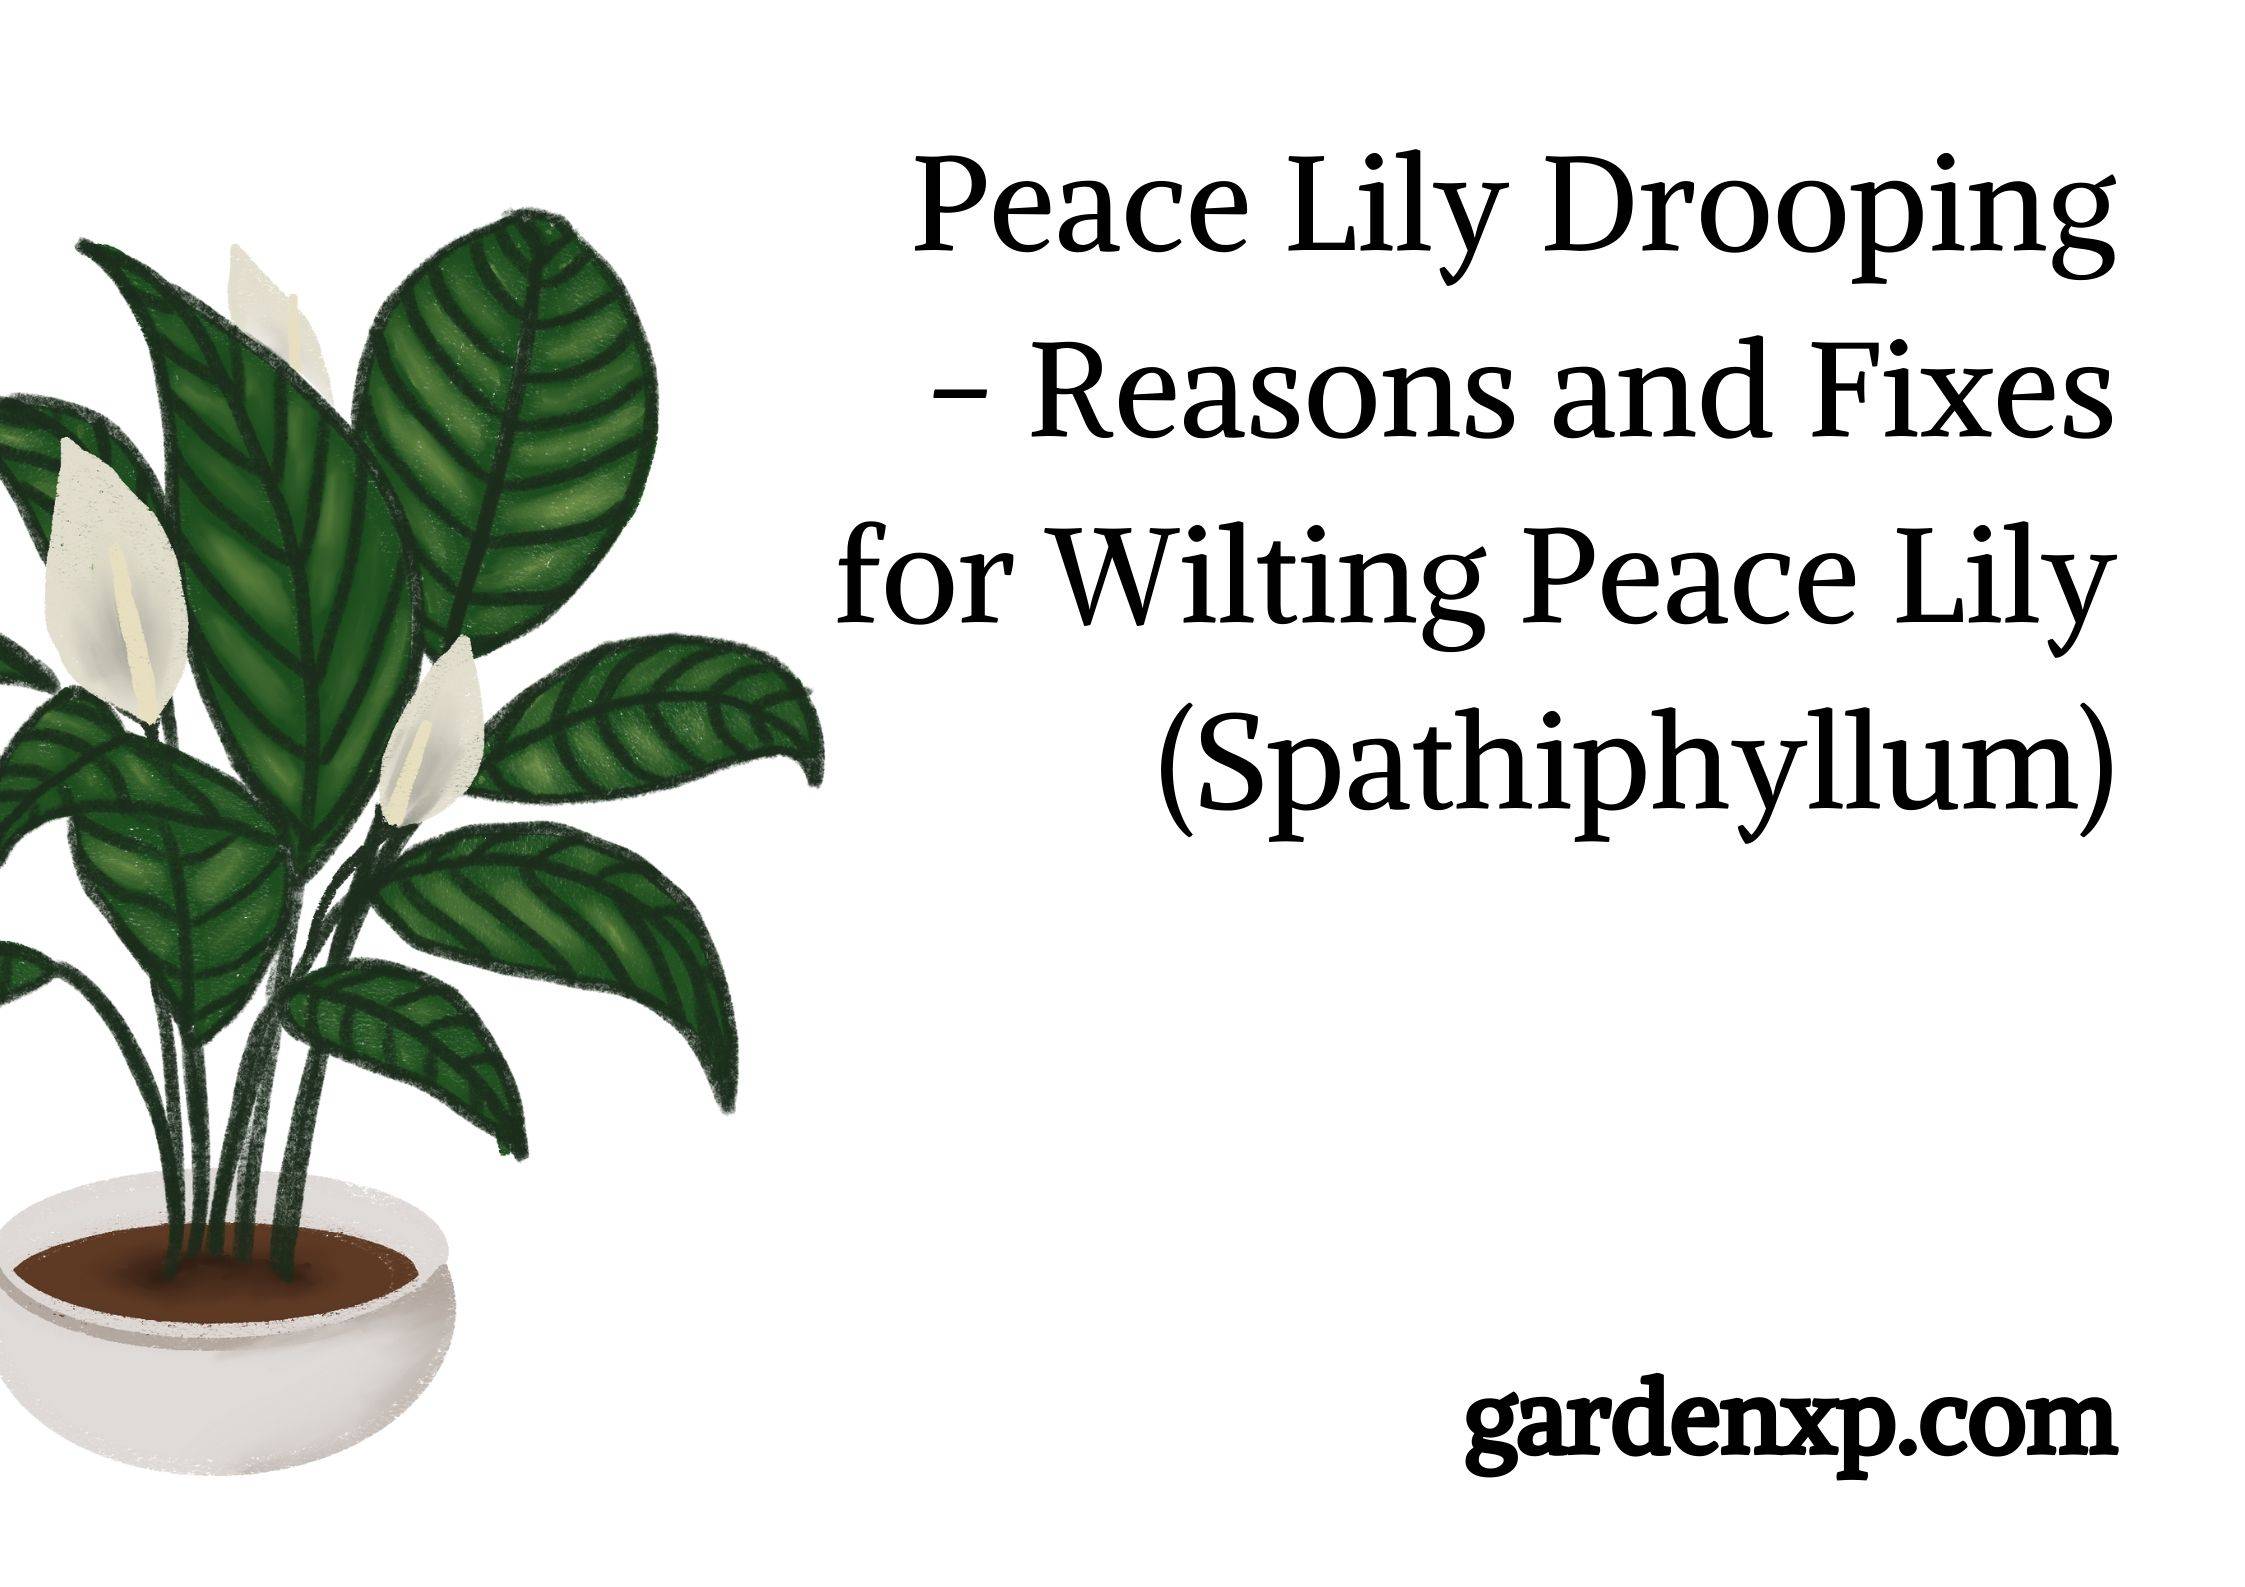 Peace Lily Drooping - Reasons and Fixes for Wilting Peace Lily (Spathiphyllum)